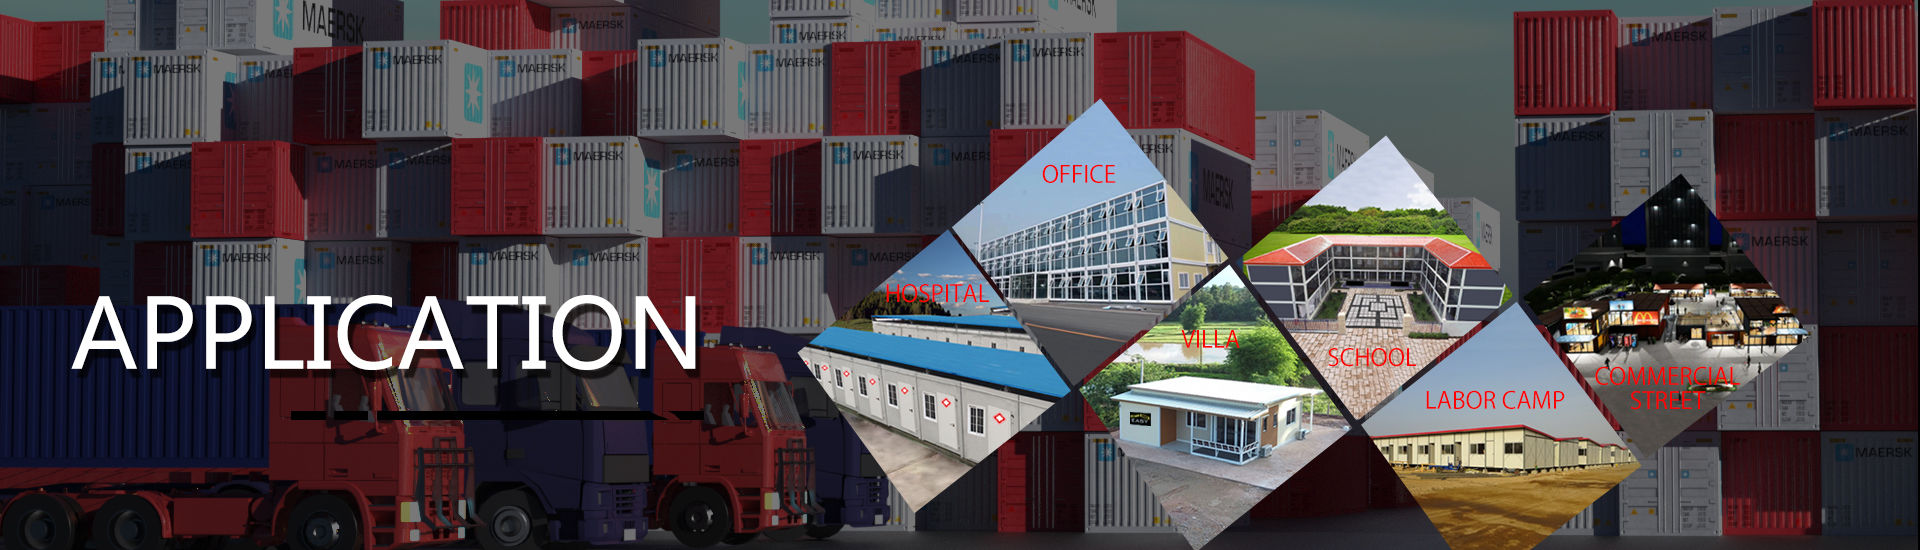 news-WELLCAMP, WELLCAMP prefab house, WELLCAMP container house-Wellcamp fight in CIBF Natcon B2B 201-2